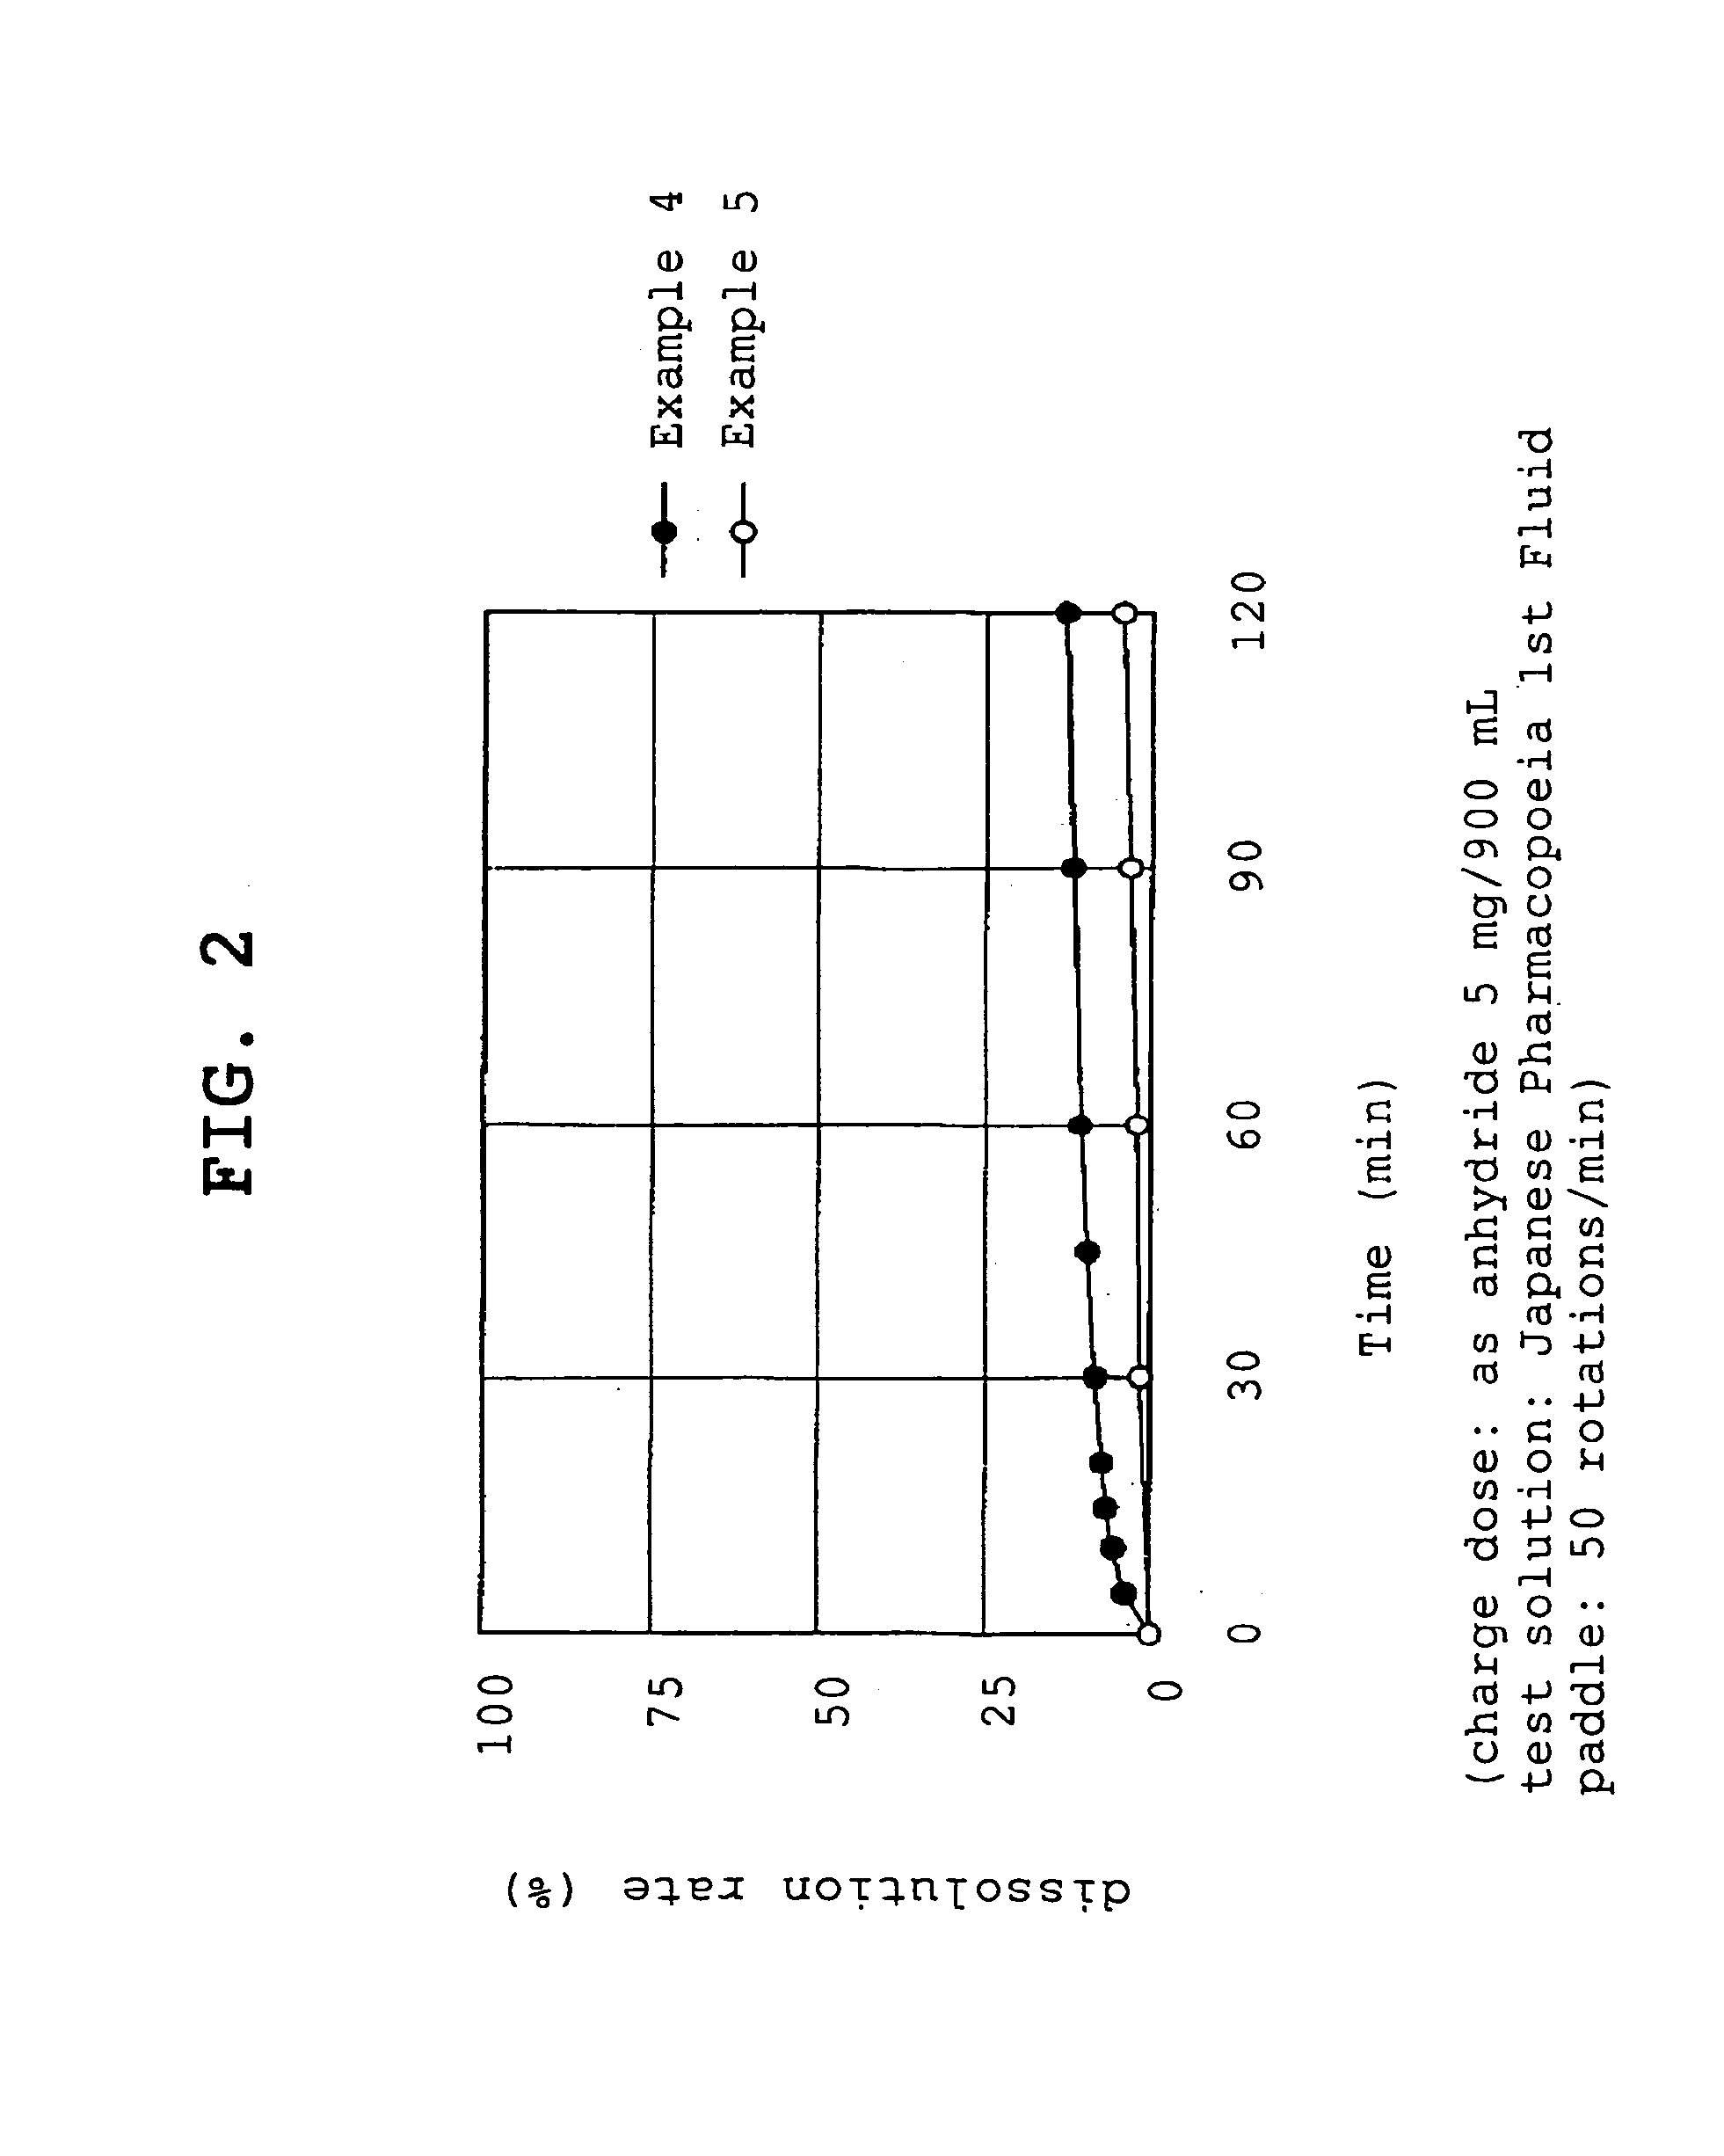 COMPOSITIONS CONTROLLING pH RANGE OF RELEASE AND/OR RELEASE RATE